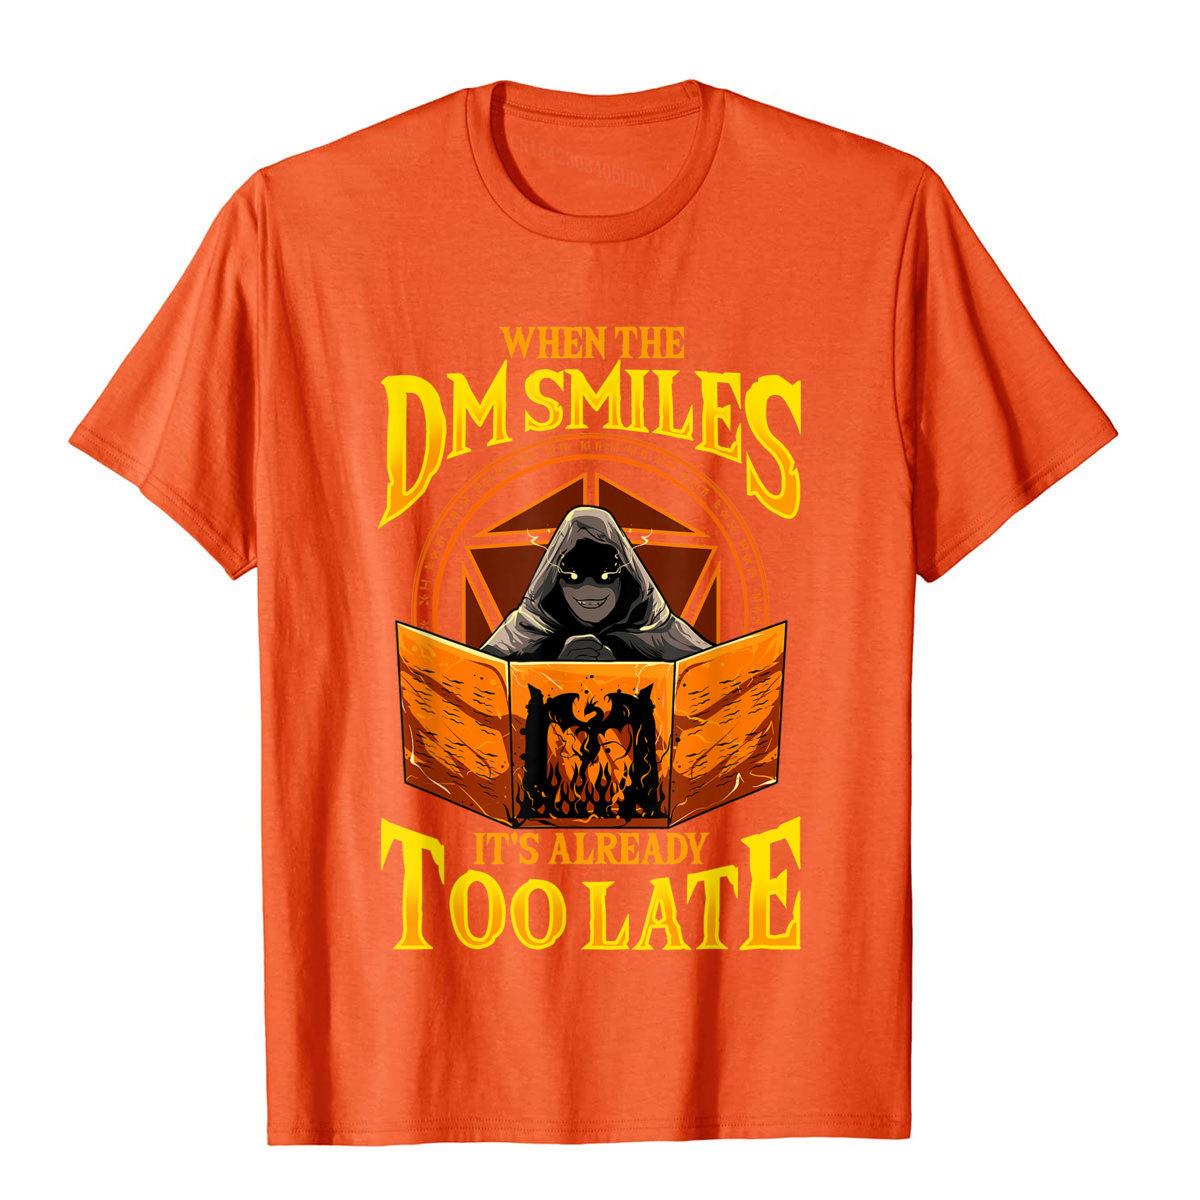 When The DM Smiles It's Already Too Late T-Shirt